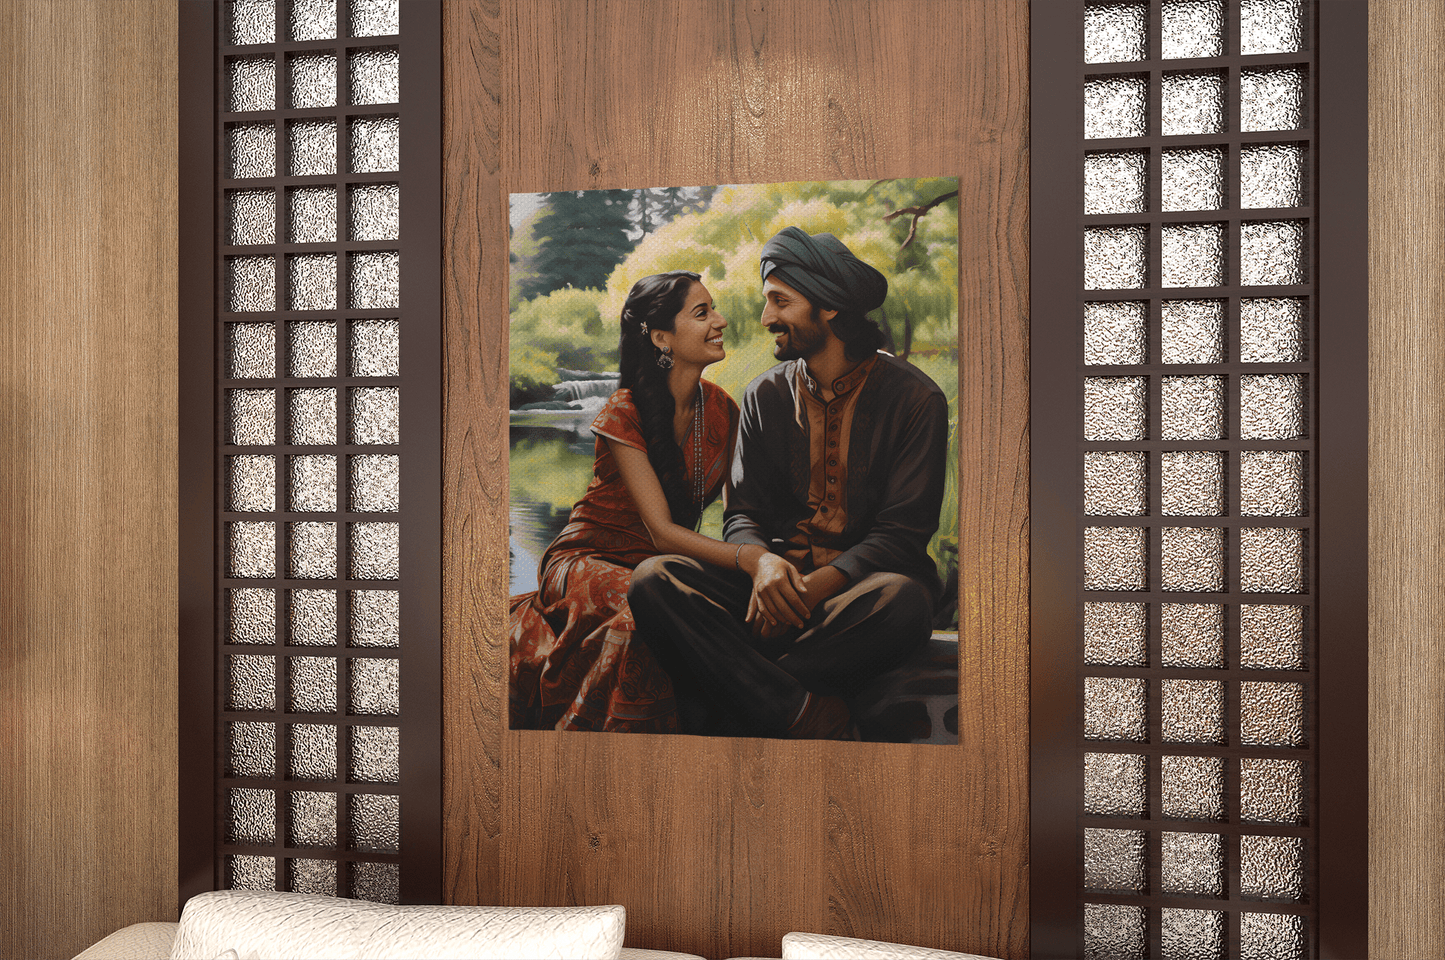 in situ Canvas by Aravind Patel depicting a young Indian couple enjoying a serene moment in a park, surrounded by tall trees and a reflective pond, capturing the essence of romantic serenity.